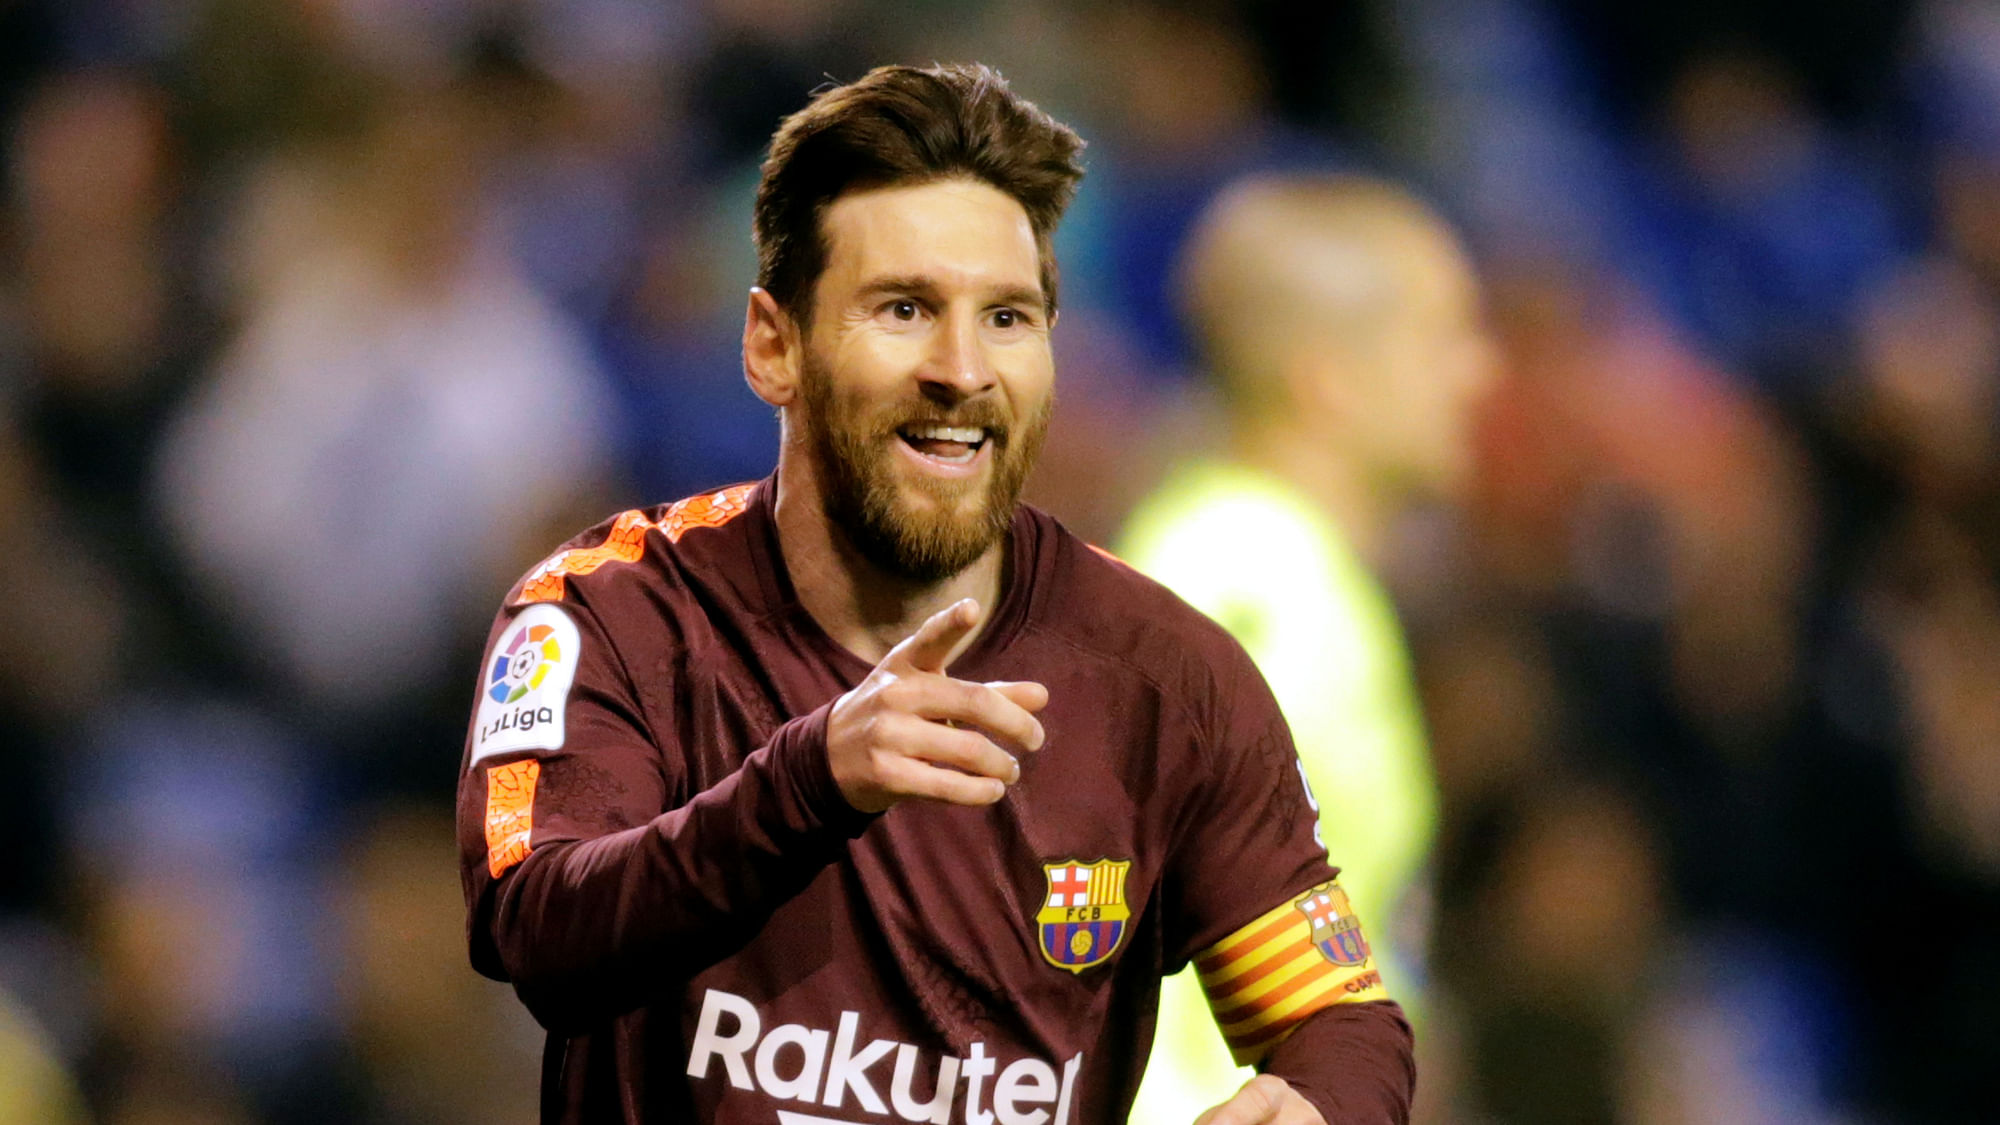 Lionel Messi scored a hat-trick as Barcelona clinched a 25th Liga title.